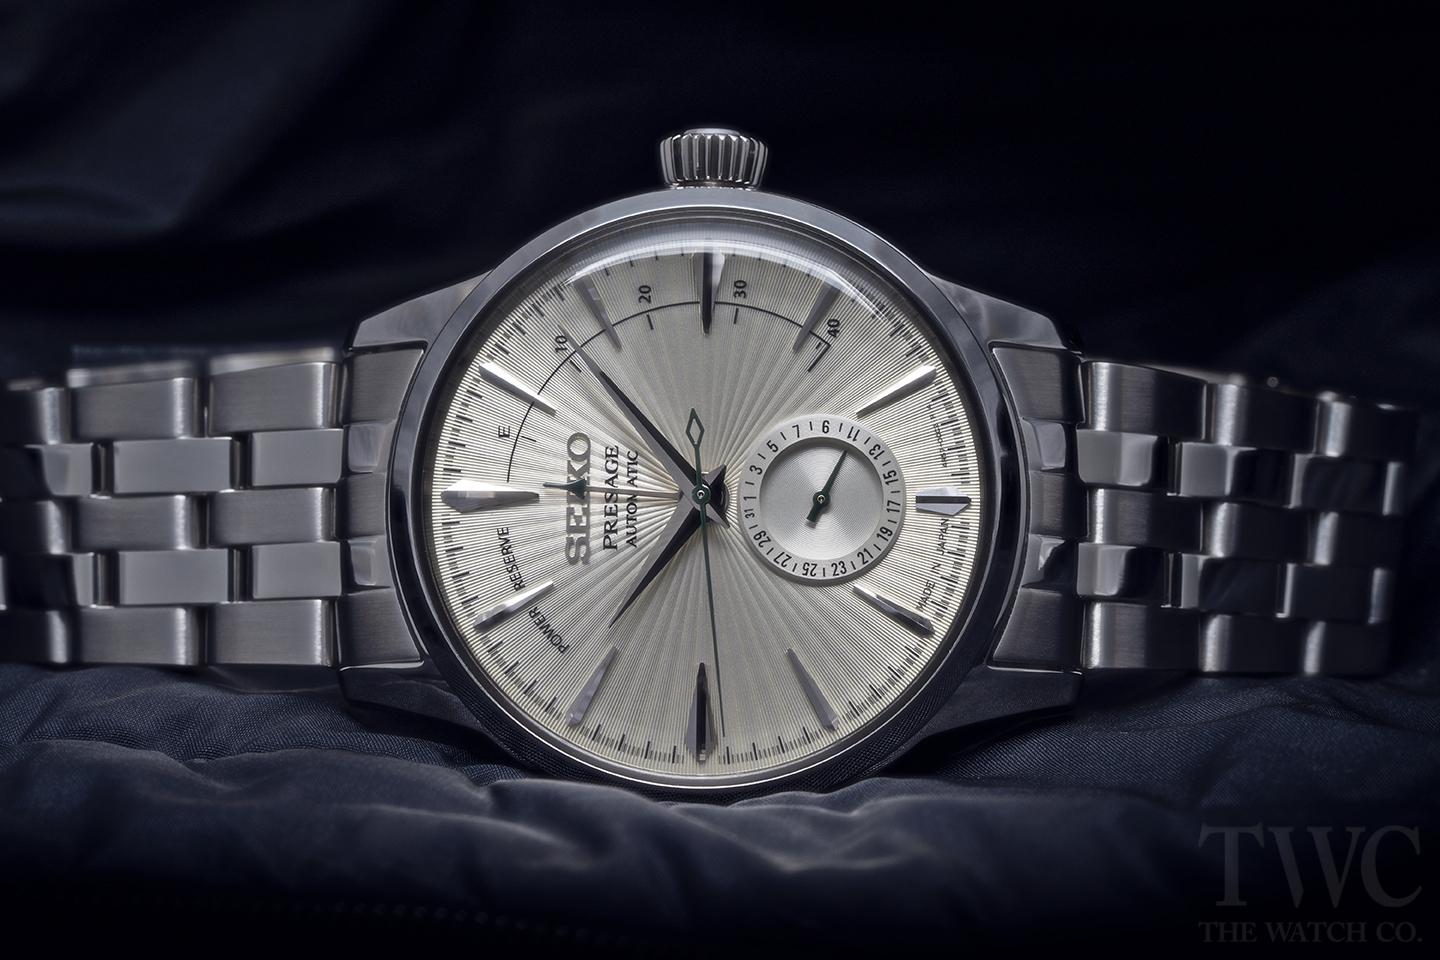 5 Of The Best Seiko Watches To Date - The Watch Company